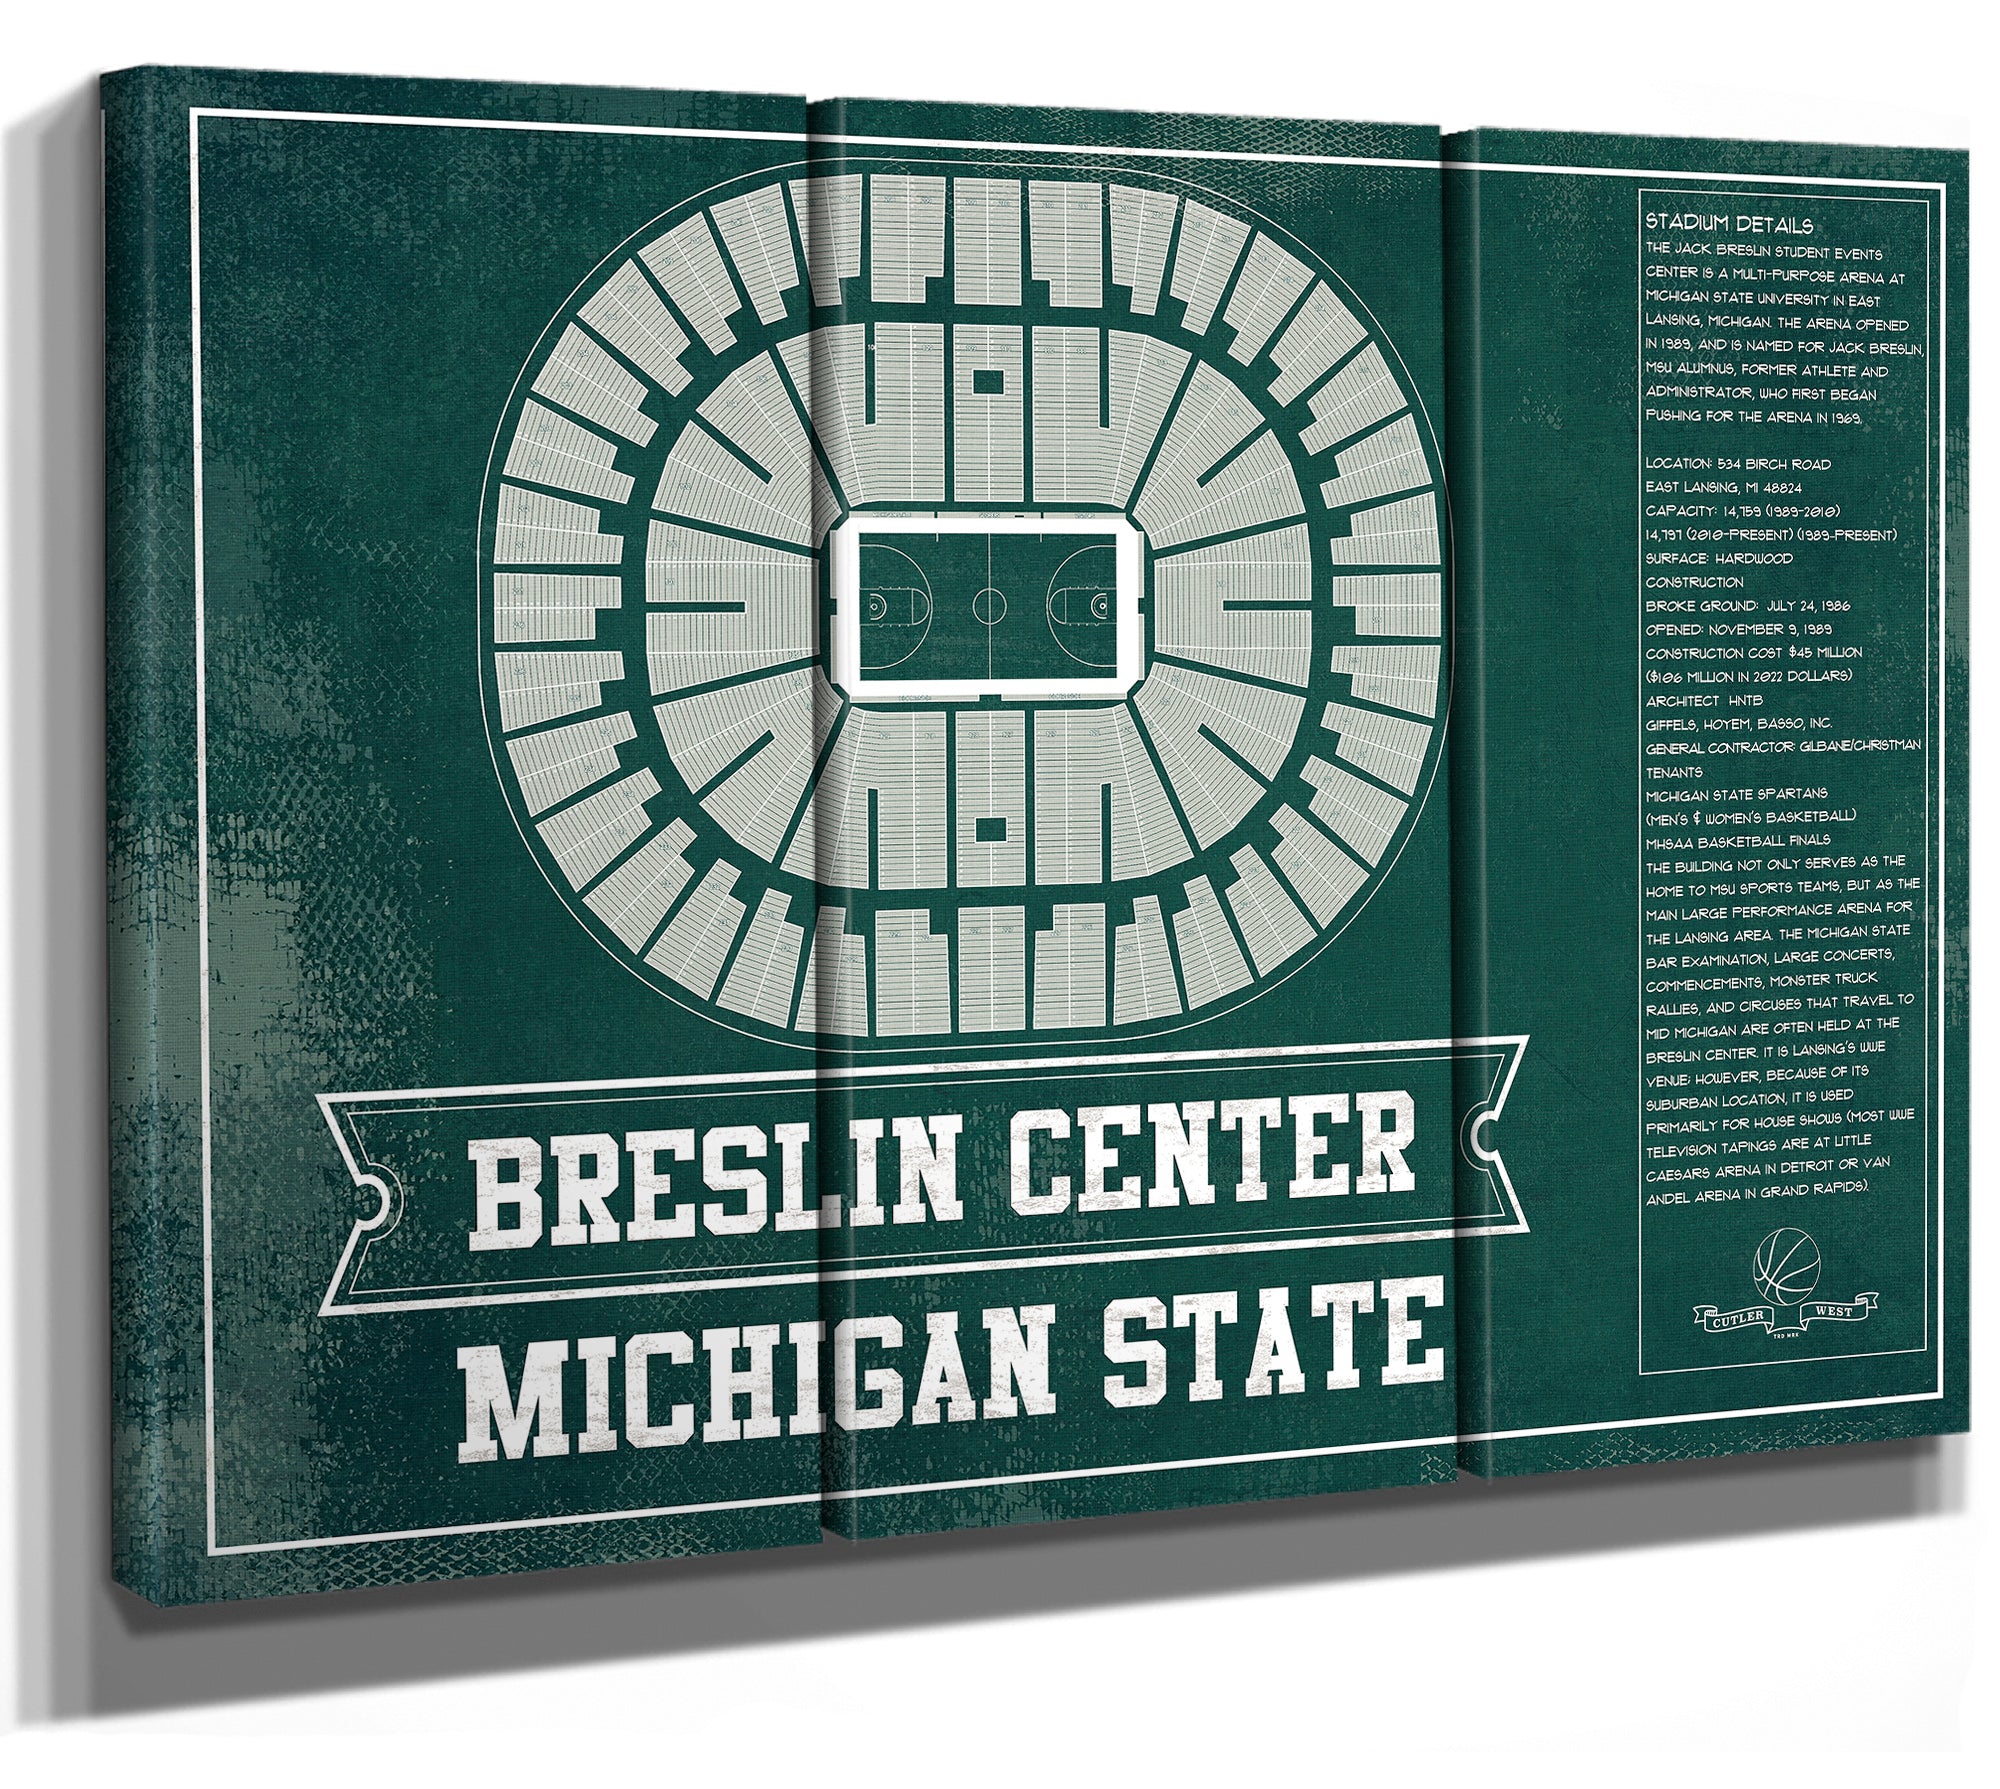 Breslin Student Events Center - Michigan State Spartans NCAA College Basketball Team Color Blueprint Art